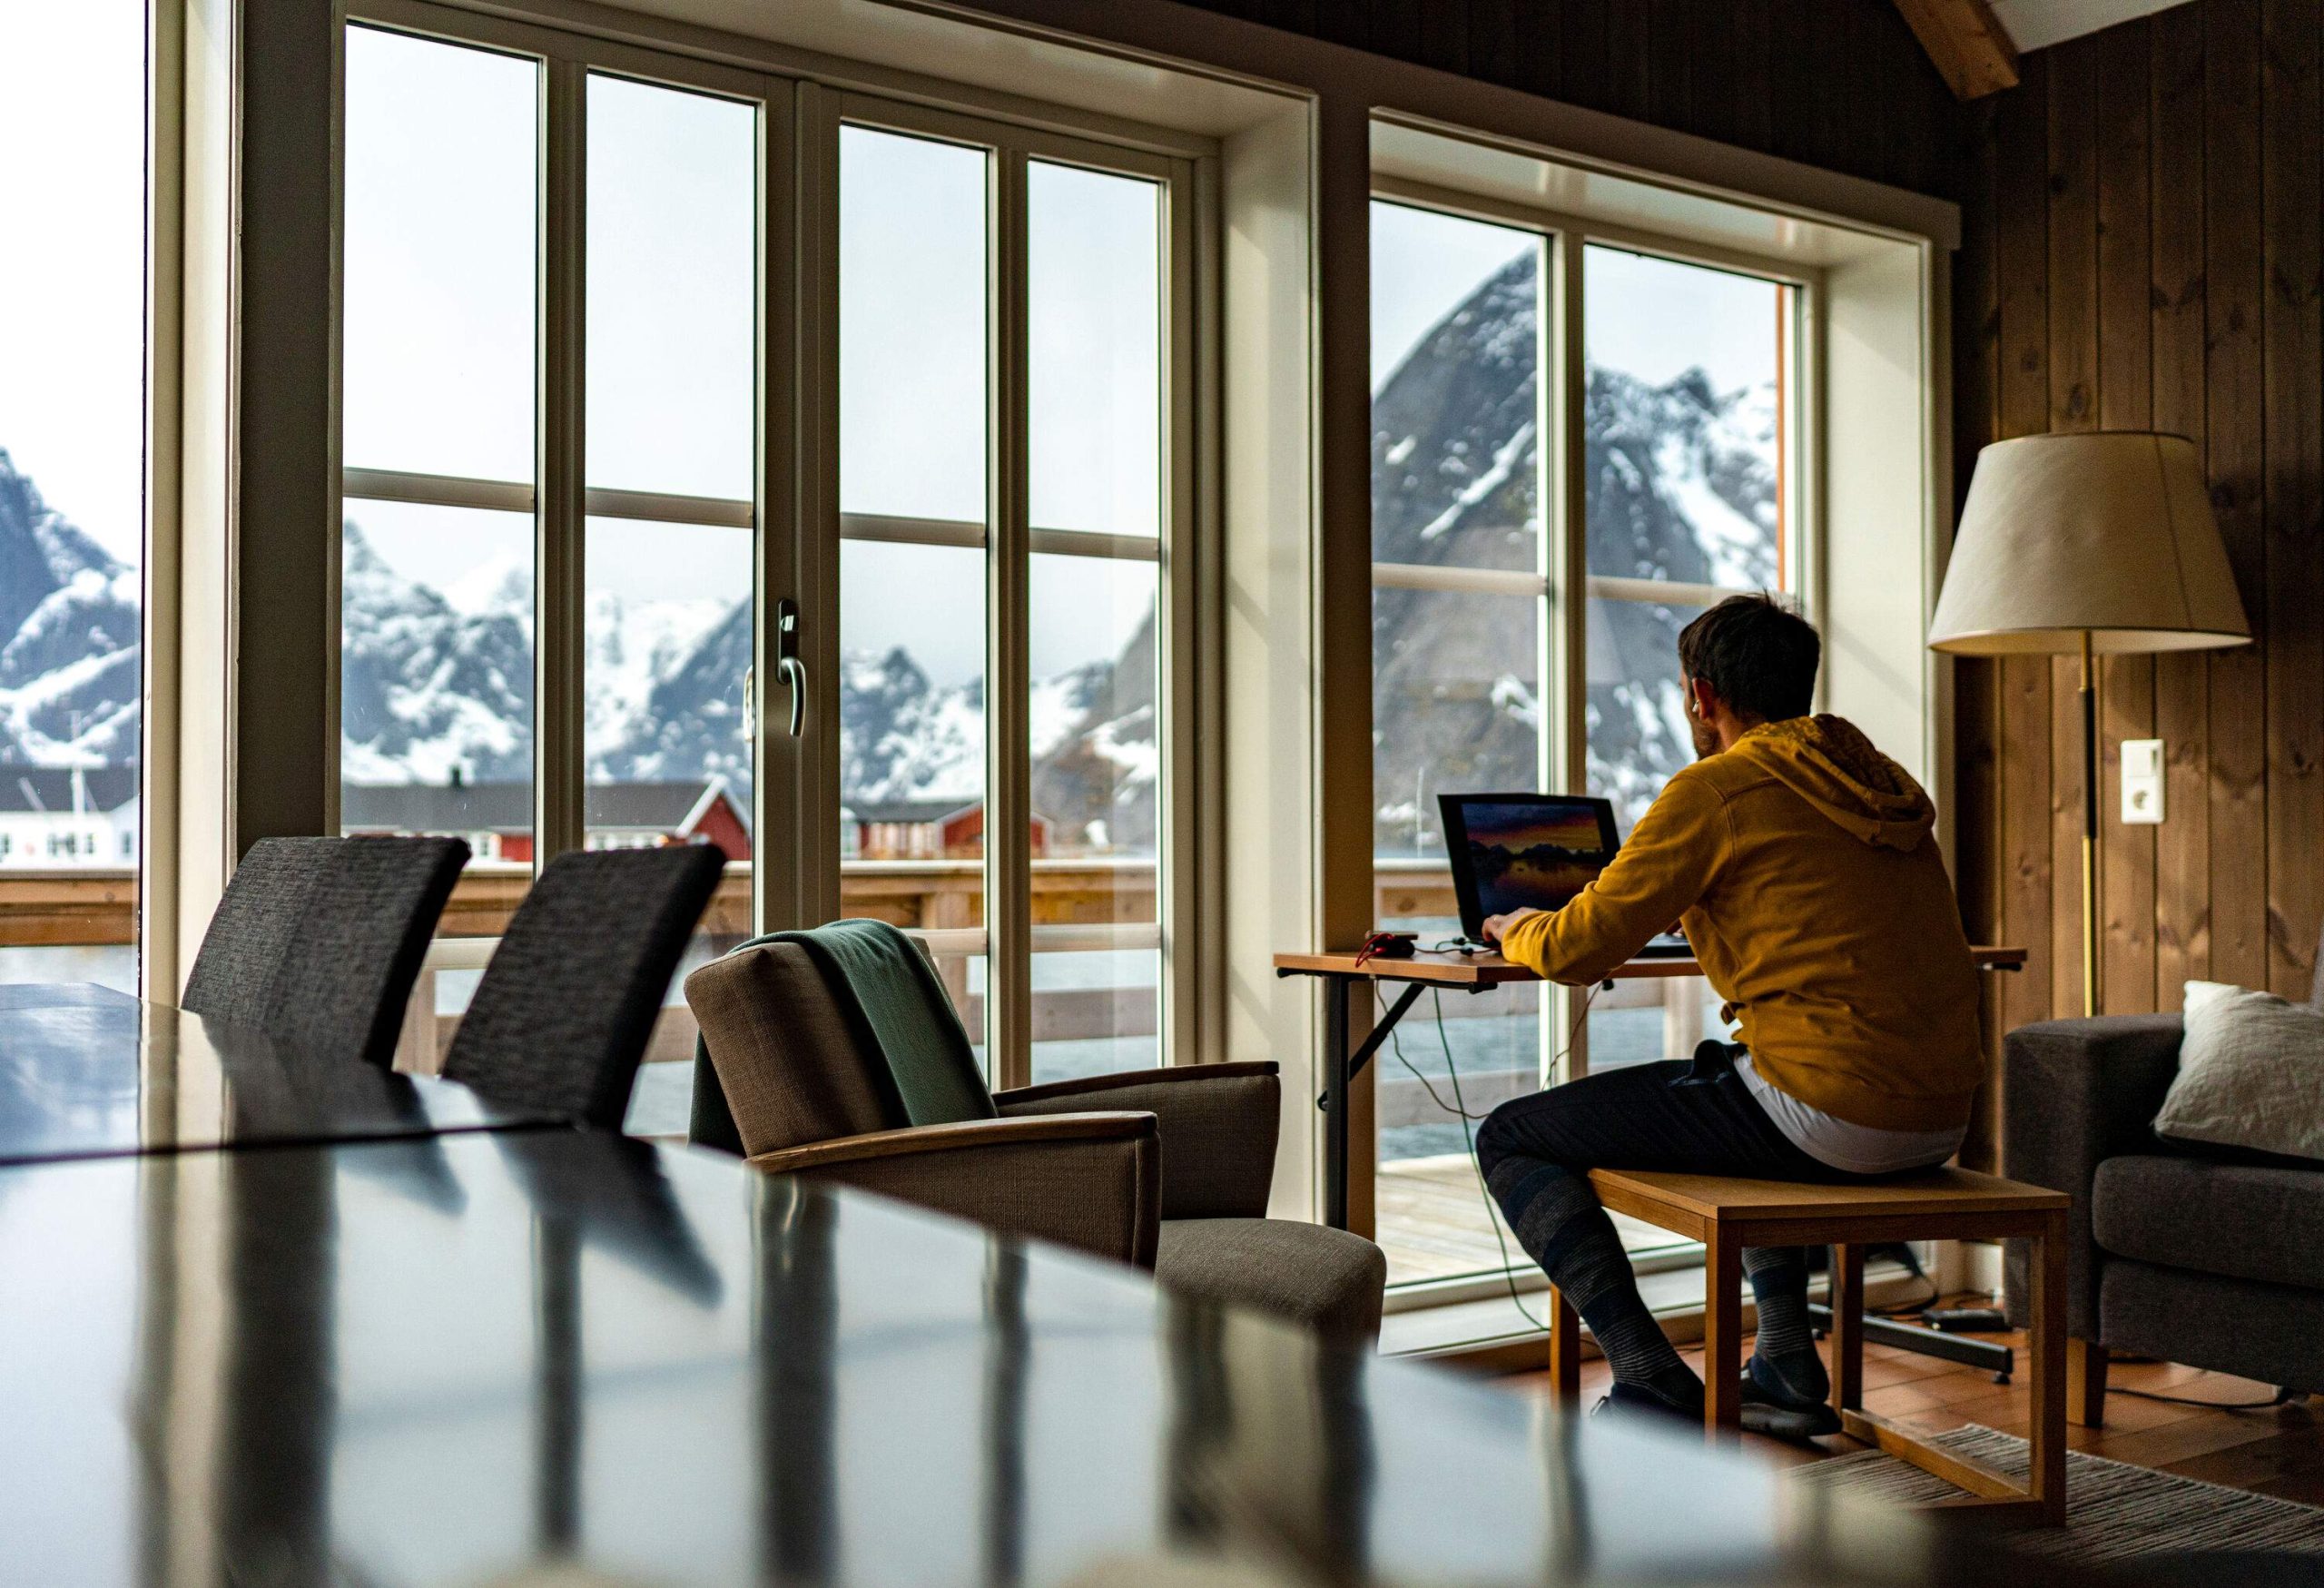 A man wearing a yellow sweatshirt working on his computer with incredible views of the snowy mountains outside.